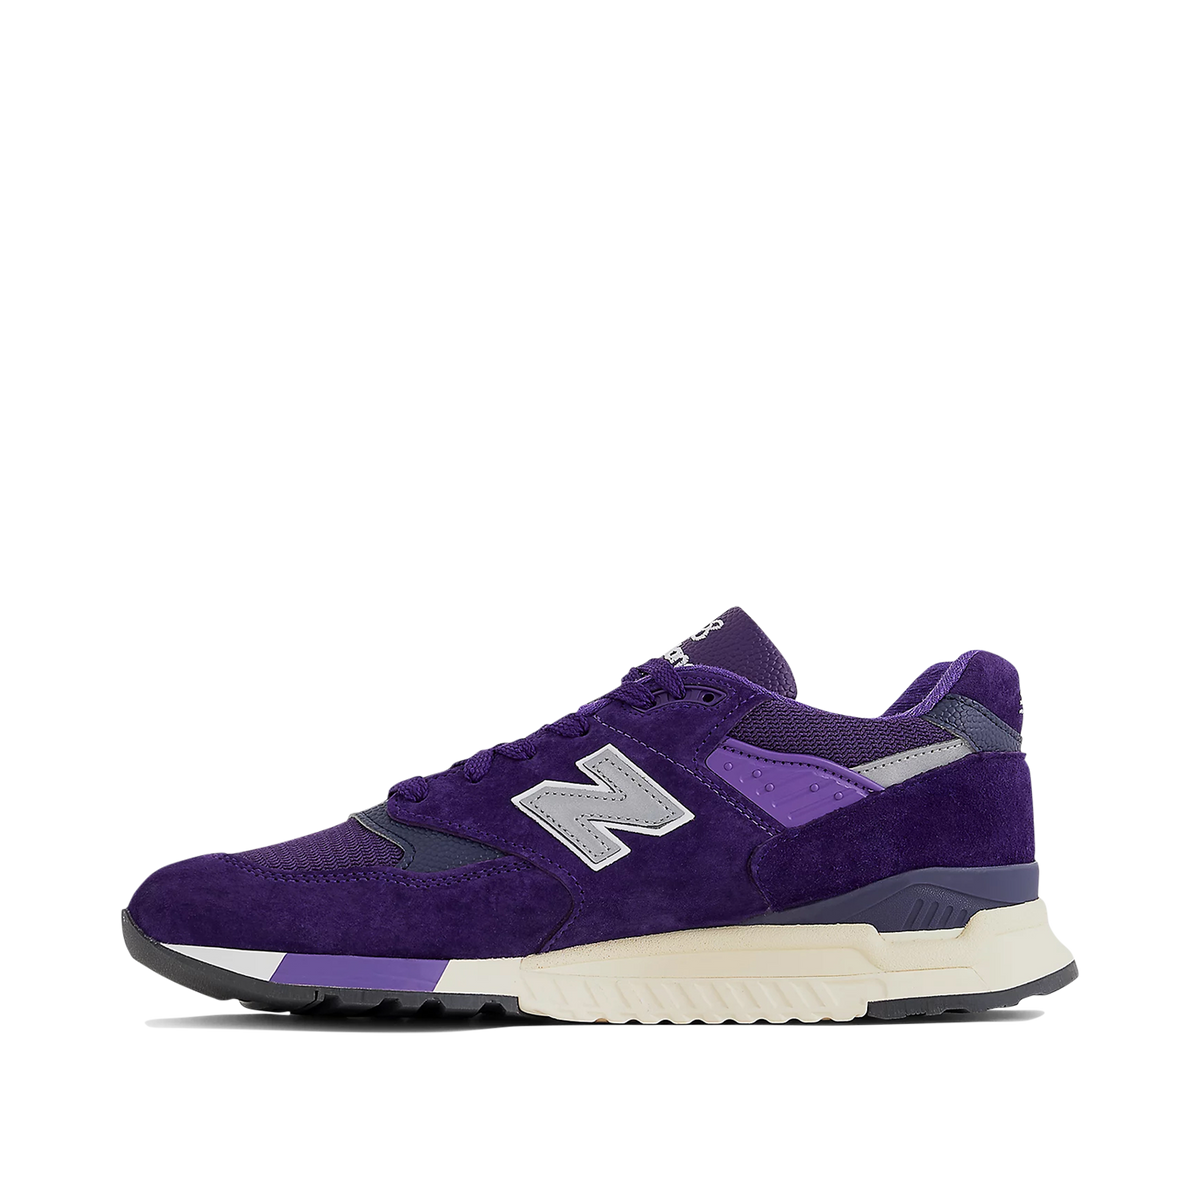 998 MADE in USA - Plum with Silver